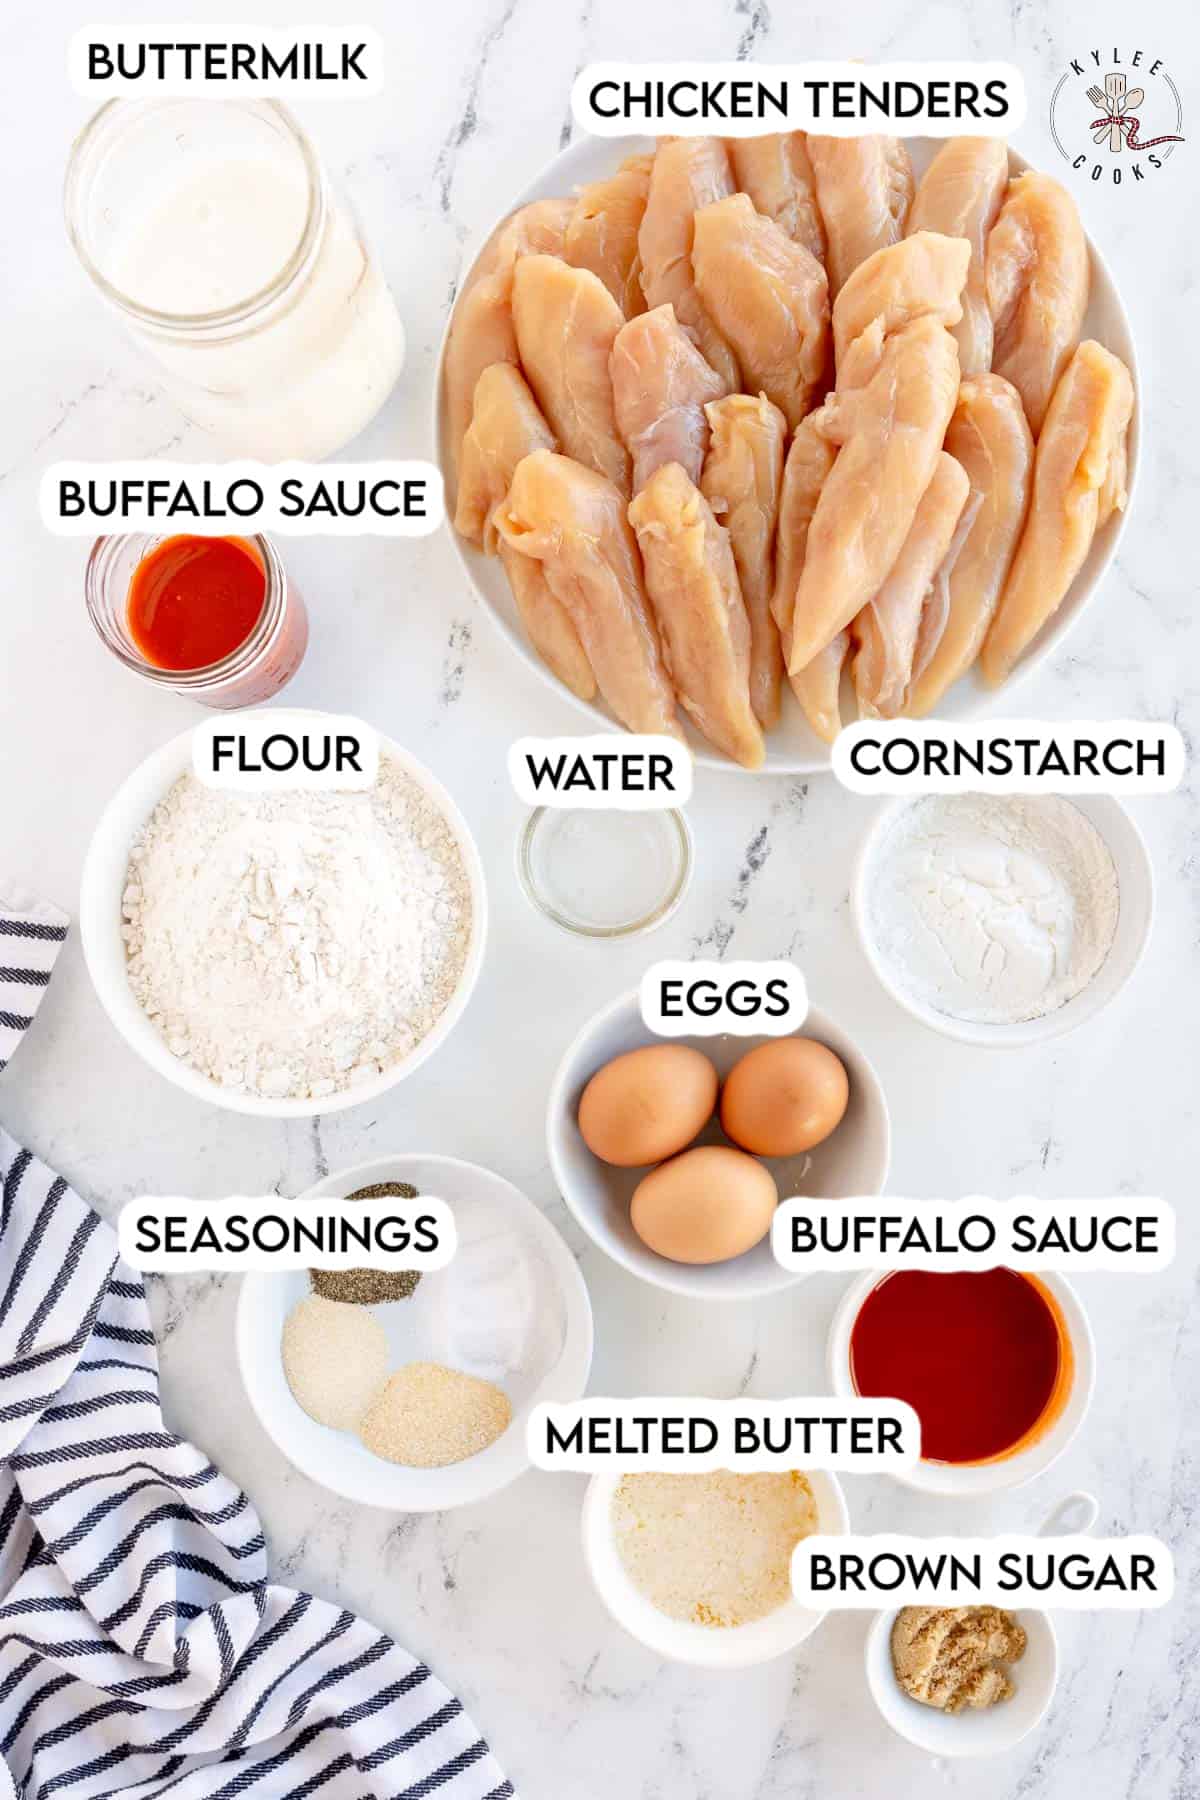 ingredients to make buffalo chicken tenders laid out and labeled.